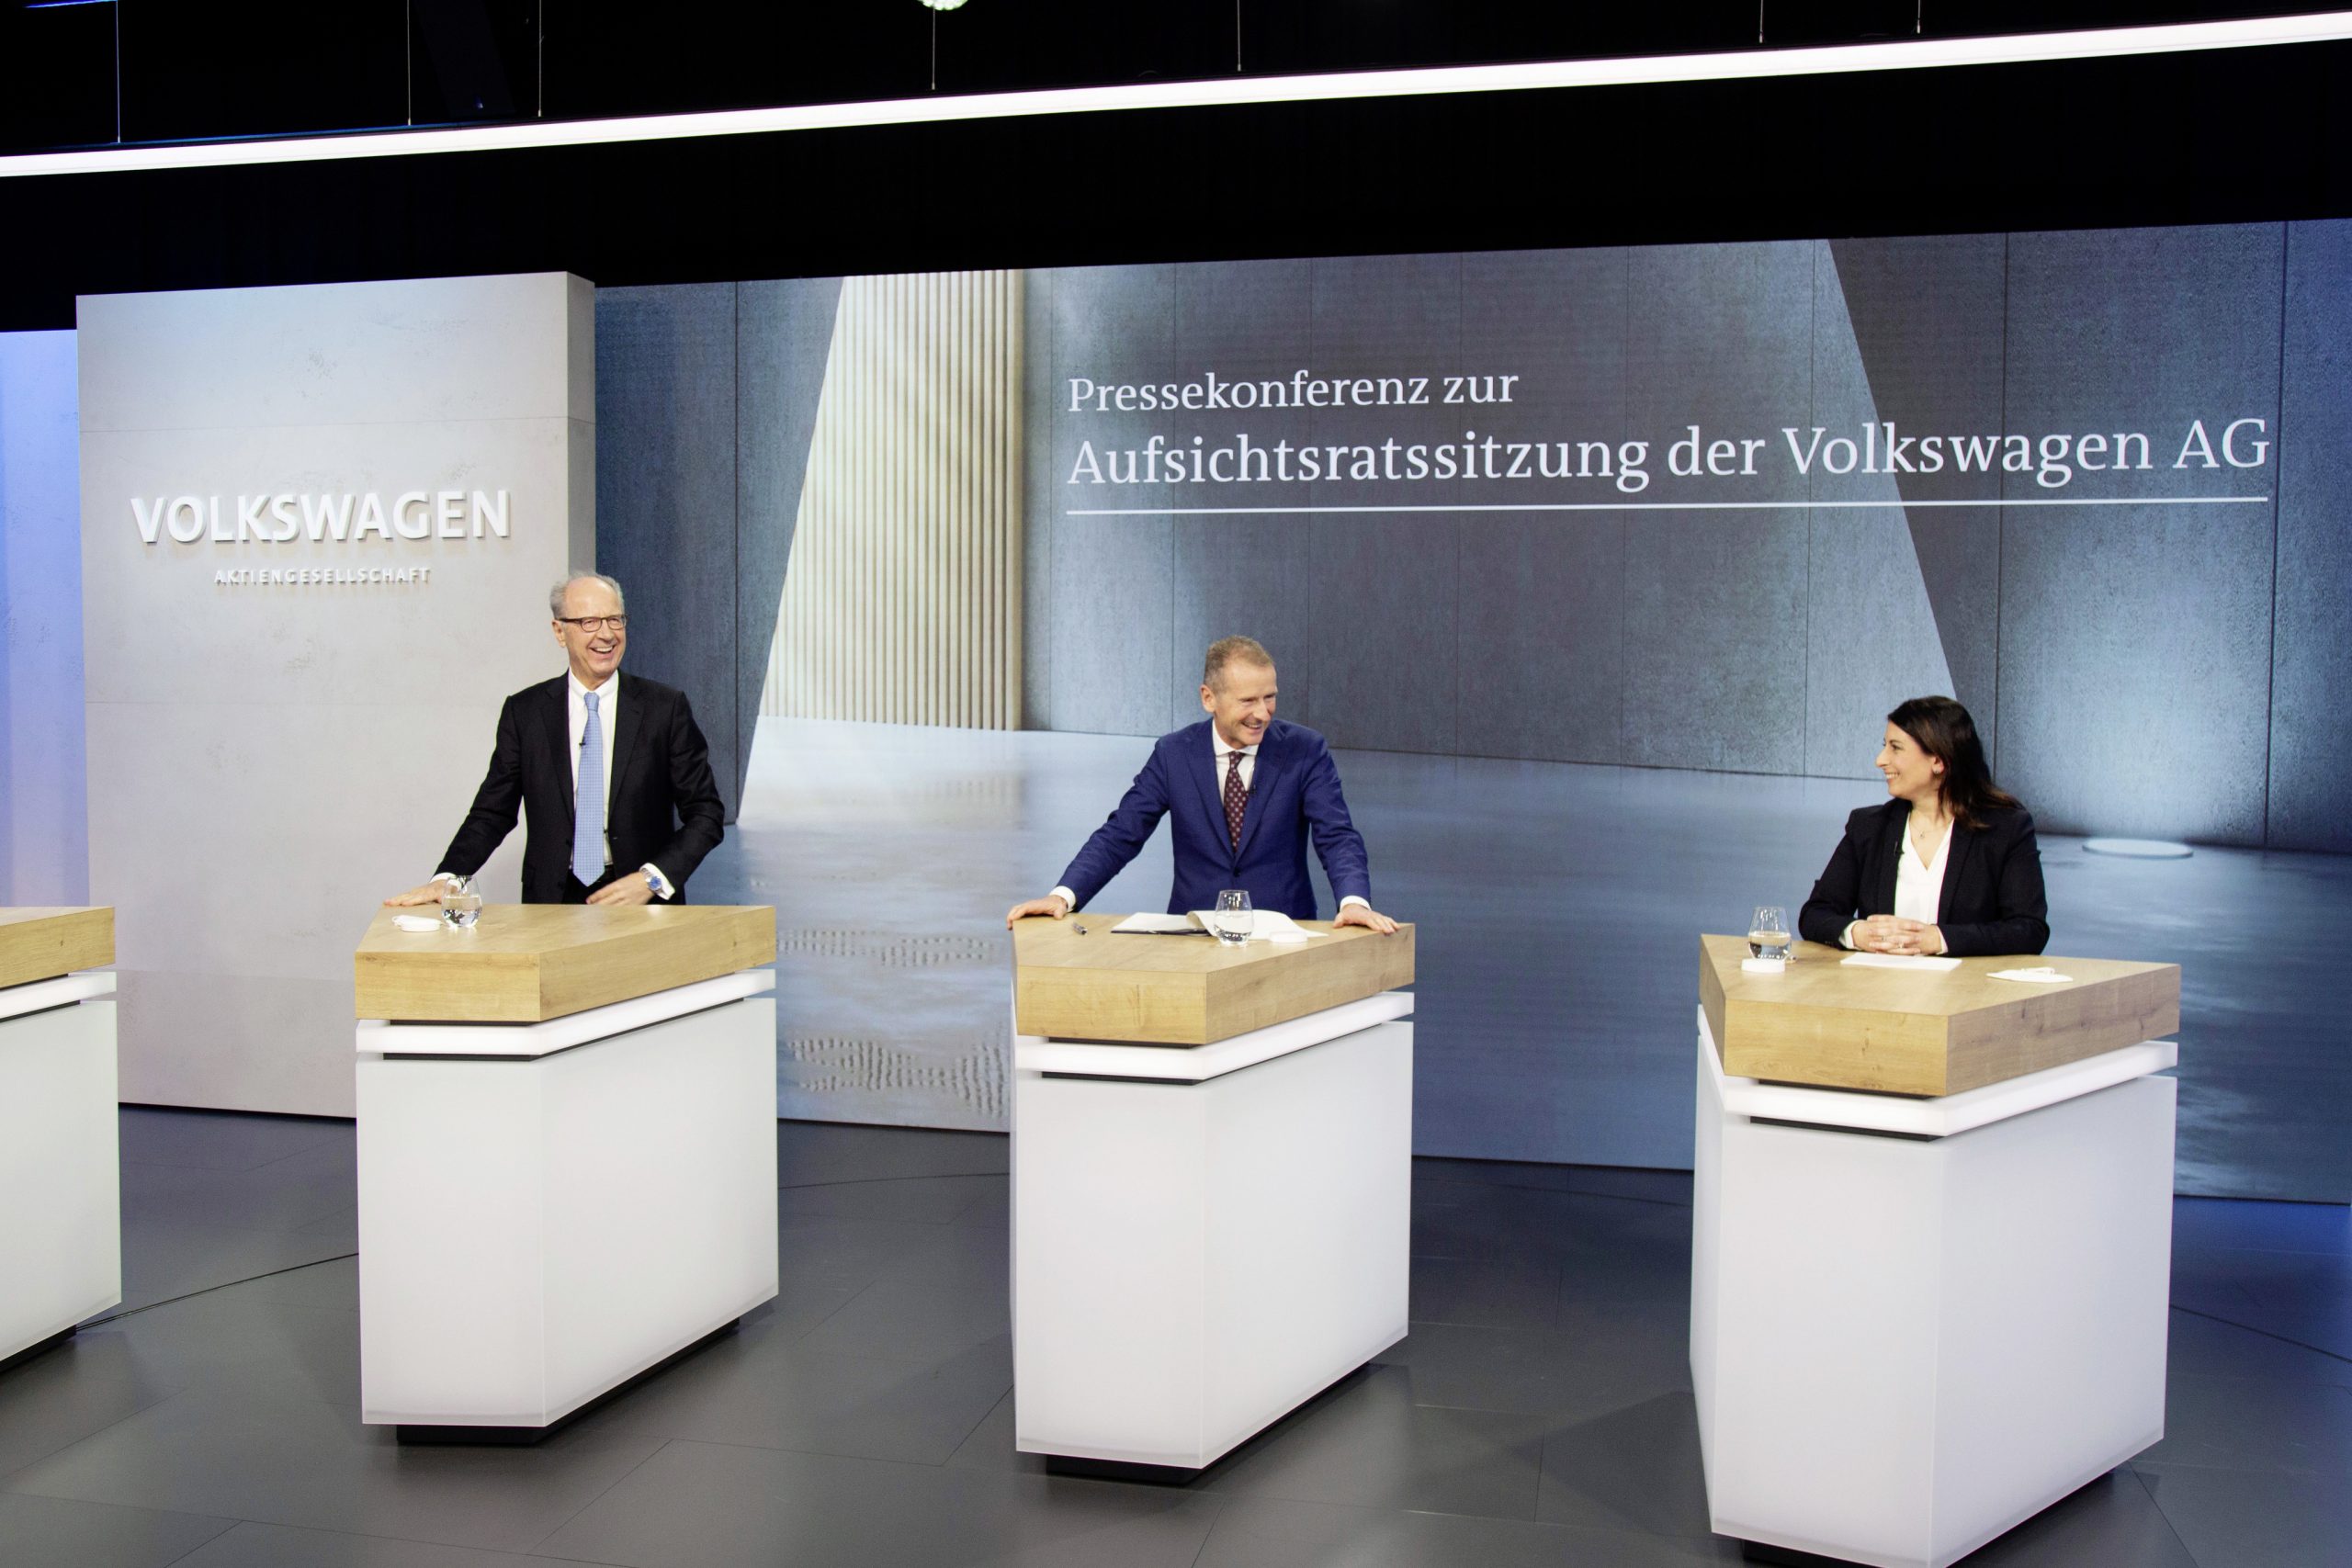 Press conference on the Supervisory Board meeting of Volkswagen